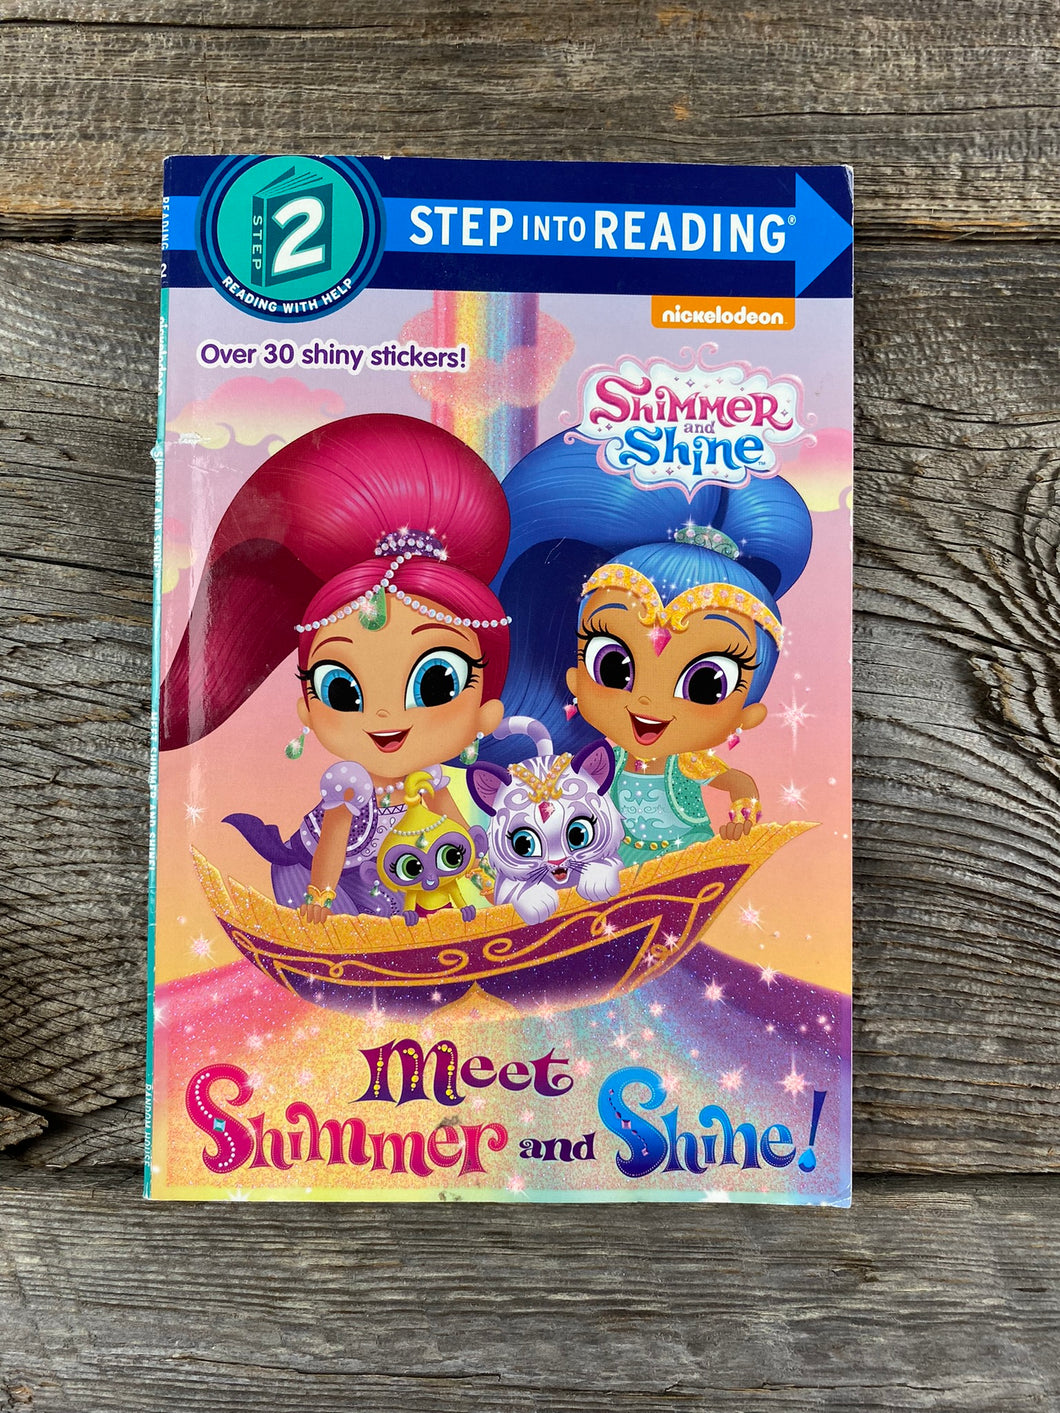 Step into Reading, Meet Shimmer and Shine!